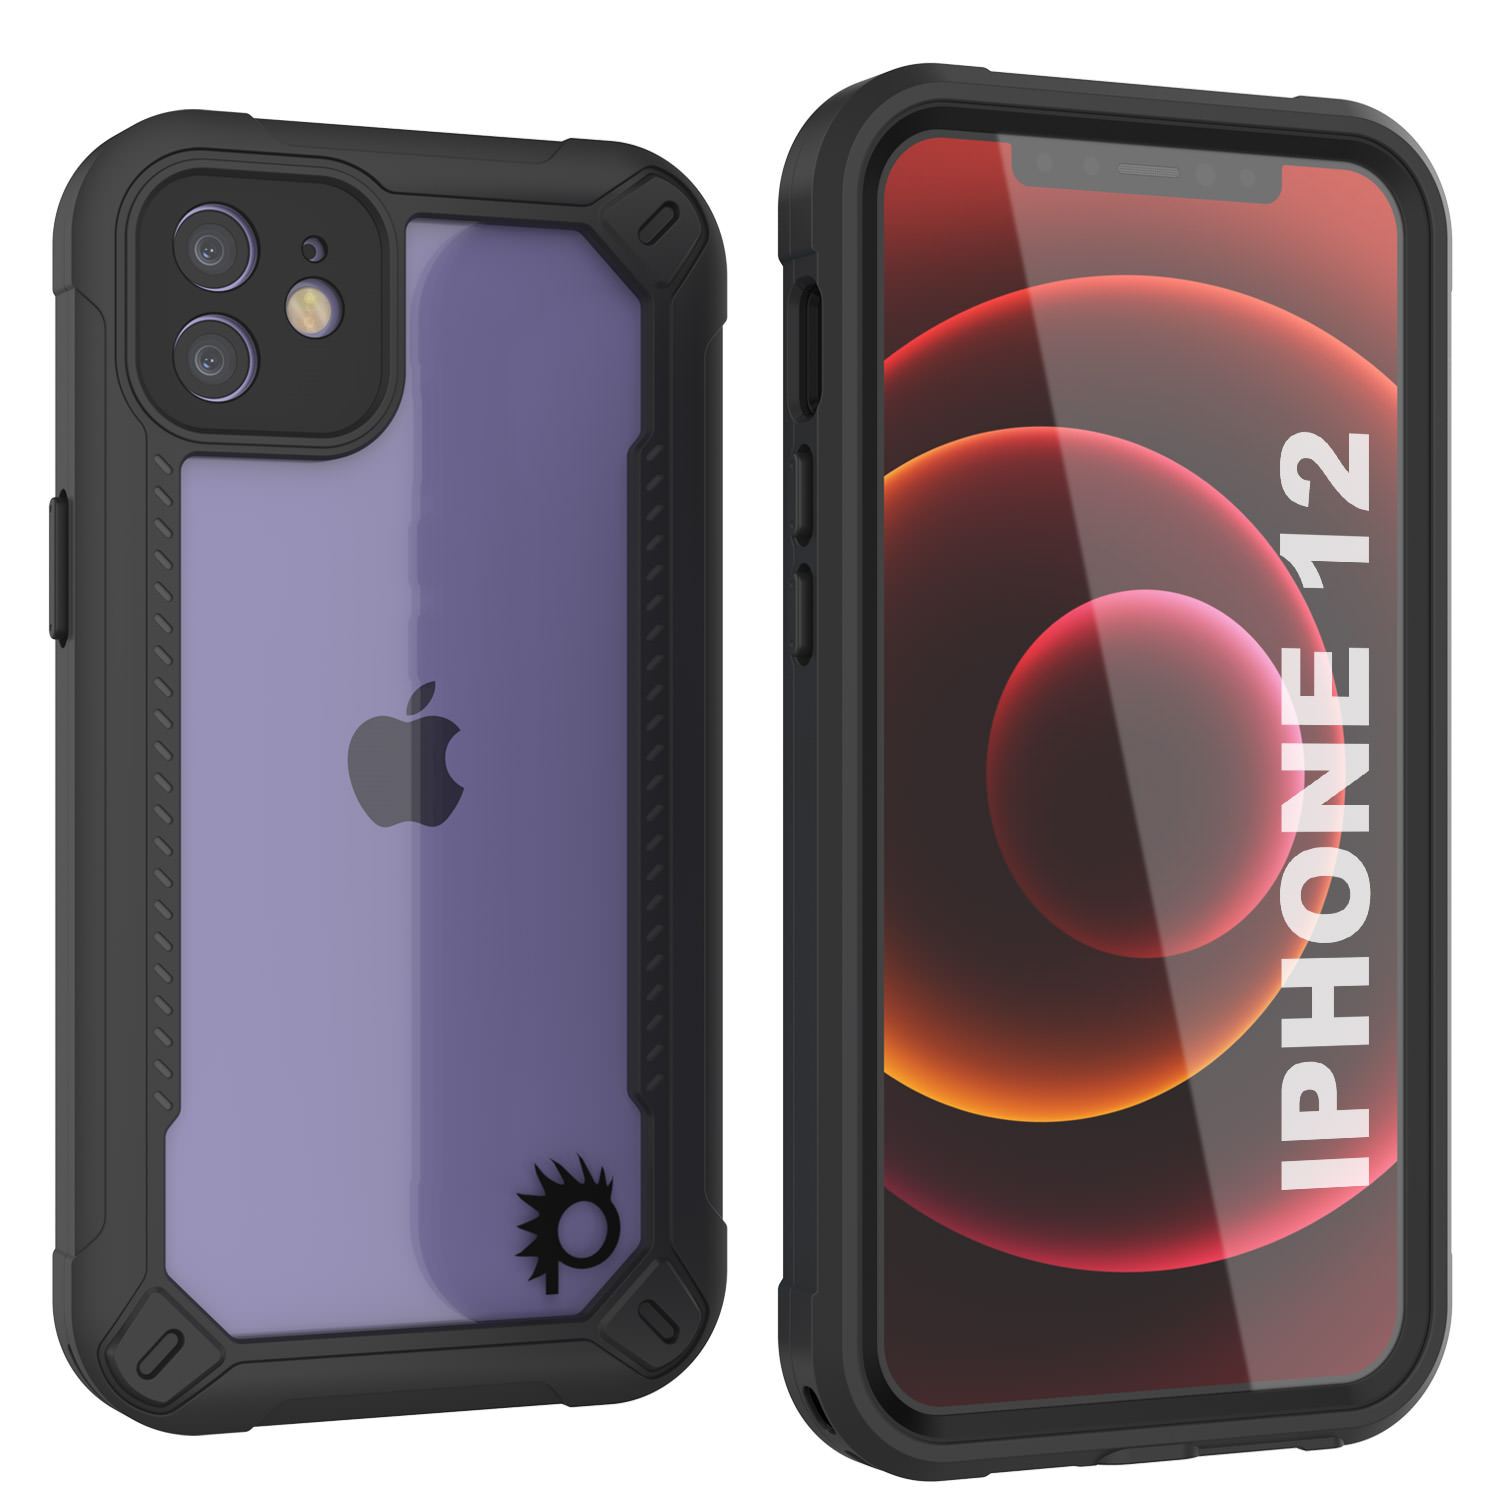 iPhone 12 Waterproof IP68 Case, Punkcase [Black]  [Maximus Series] [Slim Fit] [IP68 Certified] [Shockresistant] Clear Armor Cover with Screen Protector | Ultimate Protection (Color in image: black)